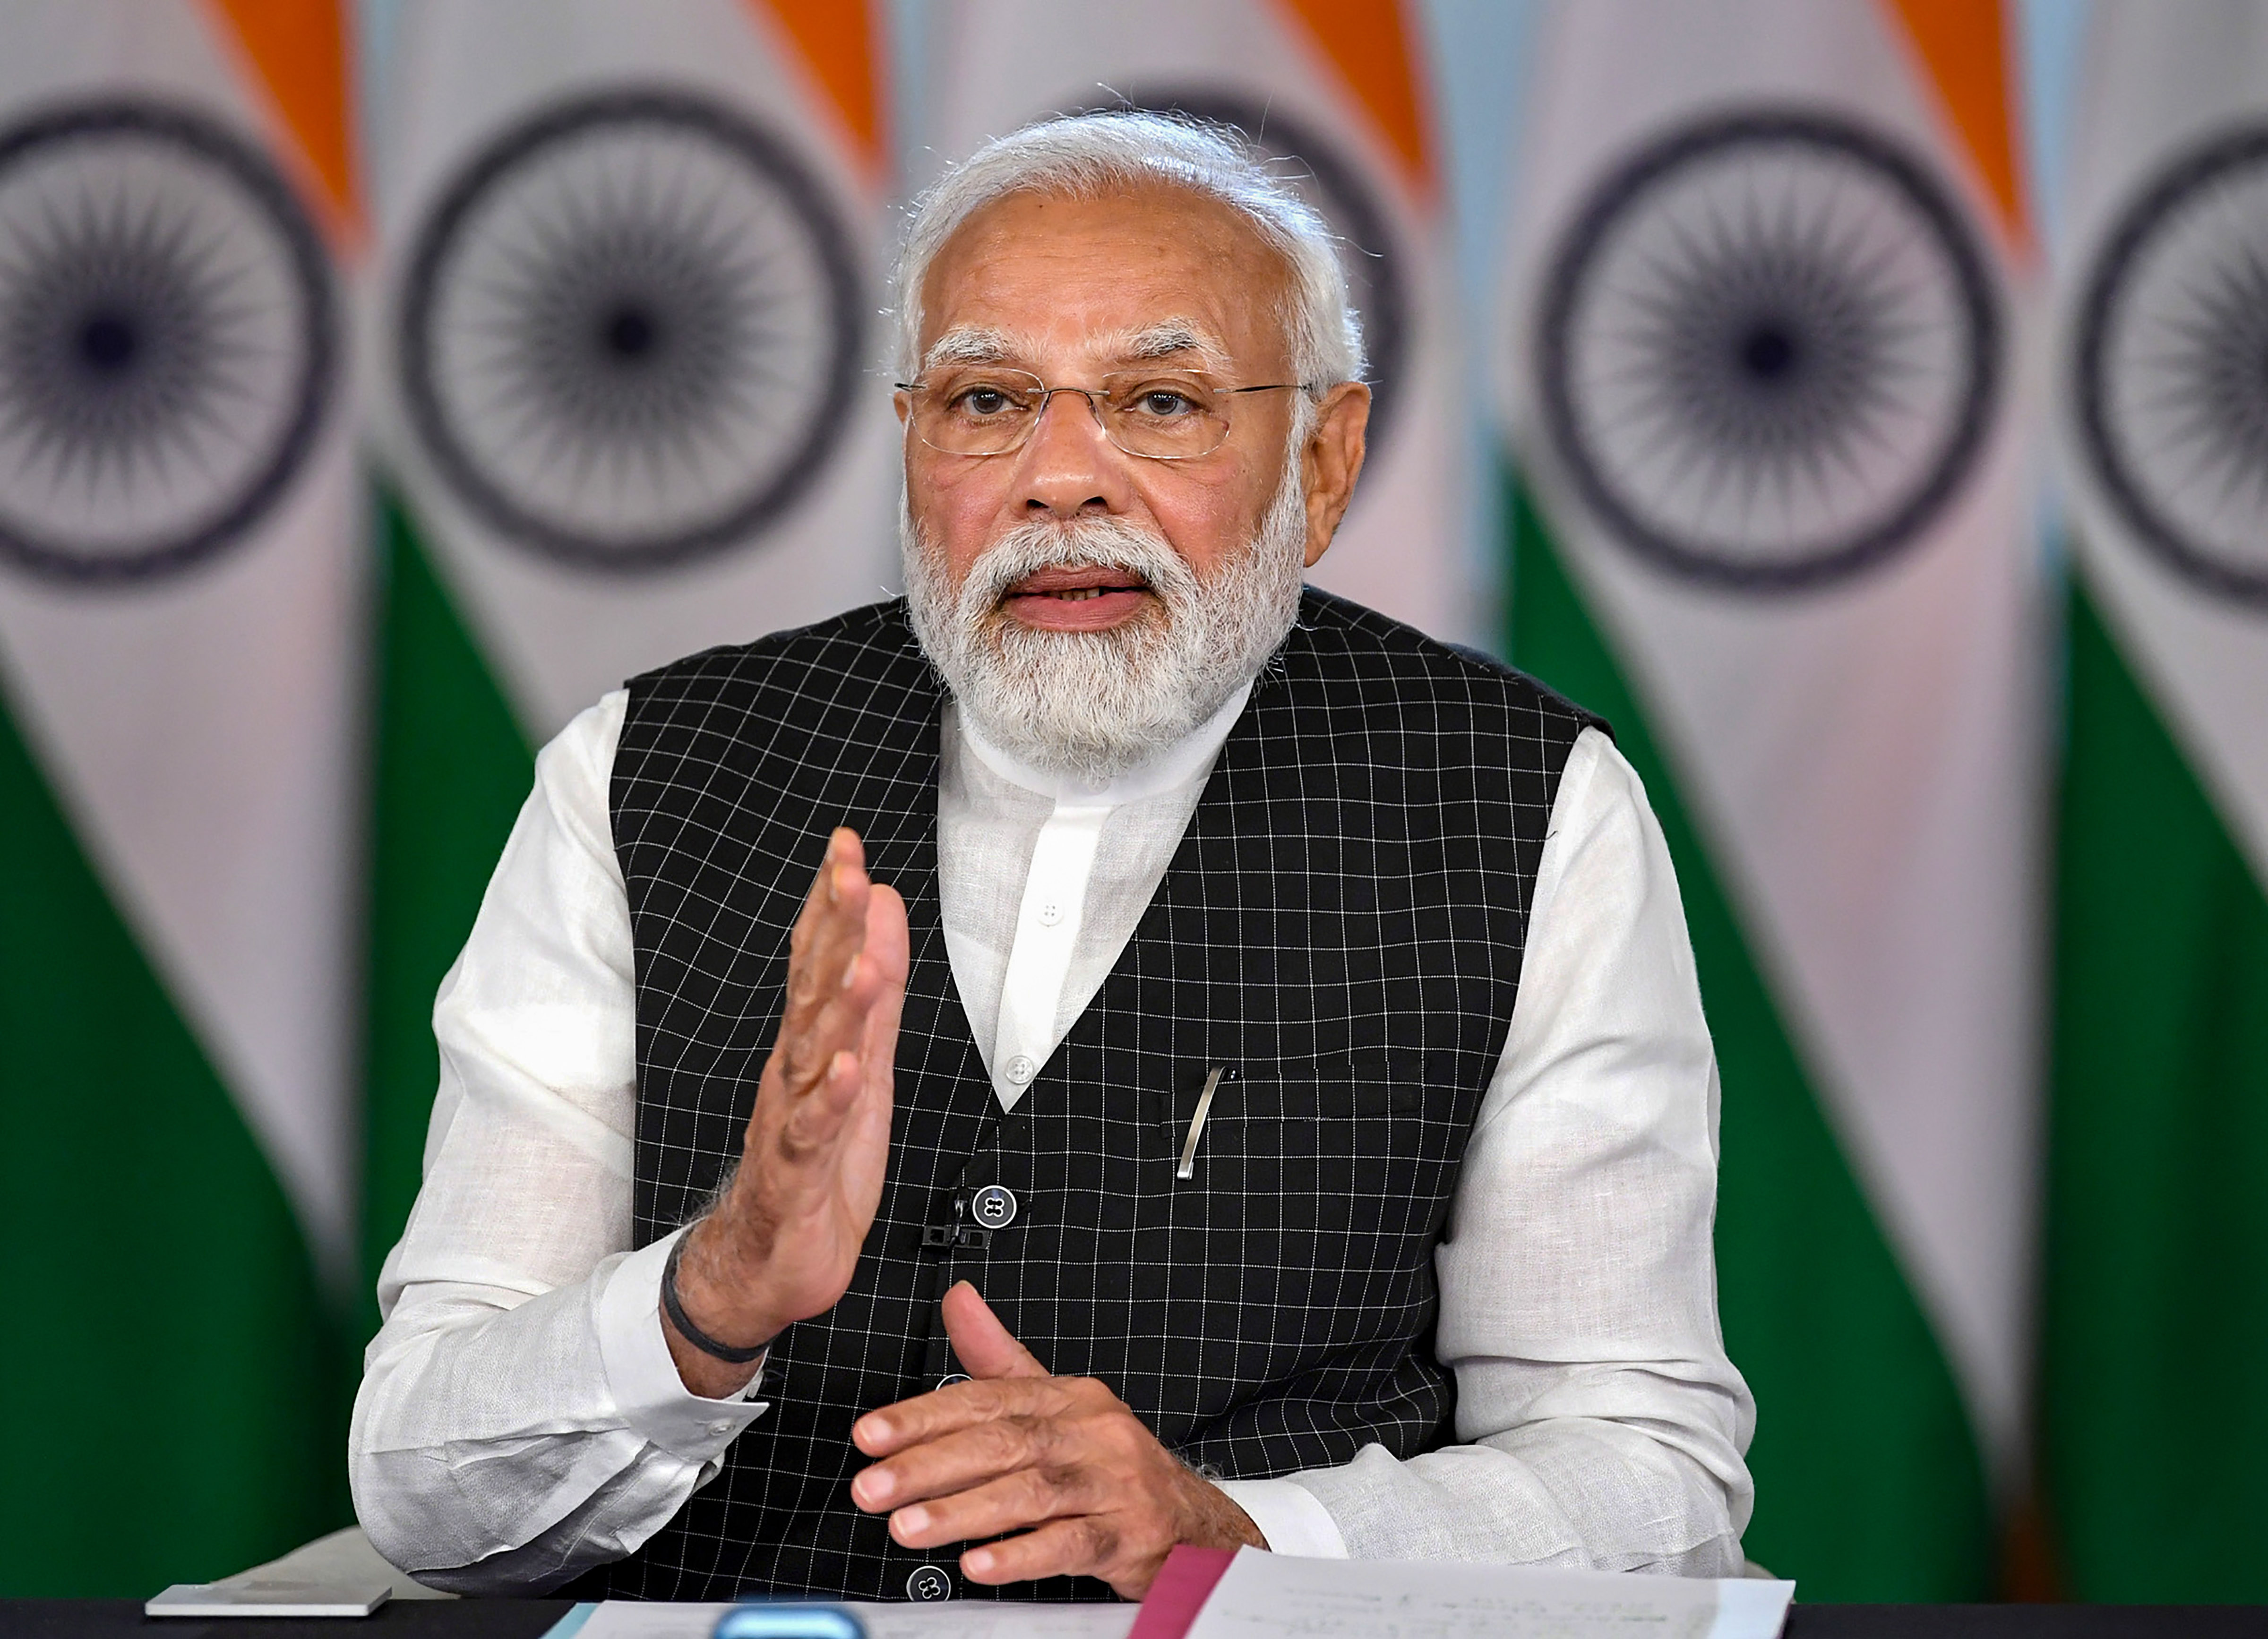 Quad Summit opportunity to review progress of grouping's initiatives: PM Modi